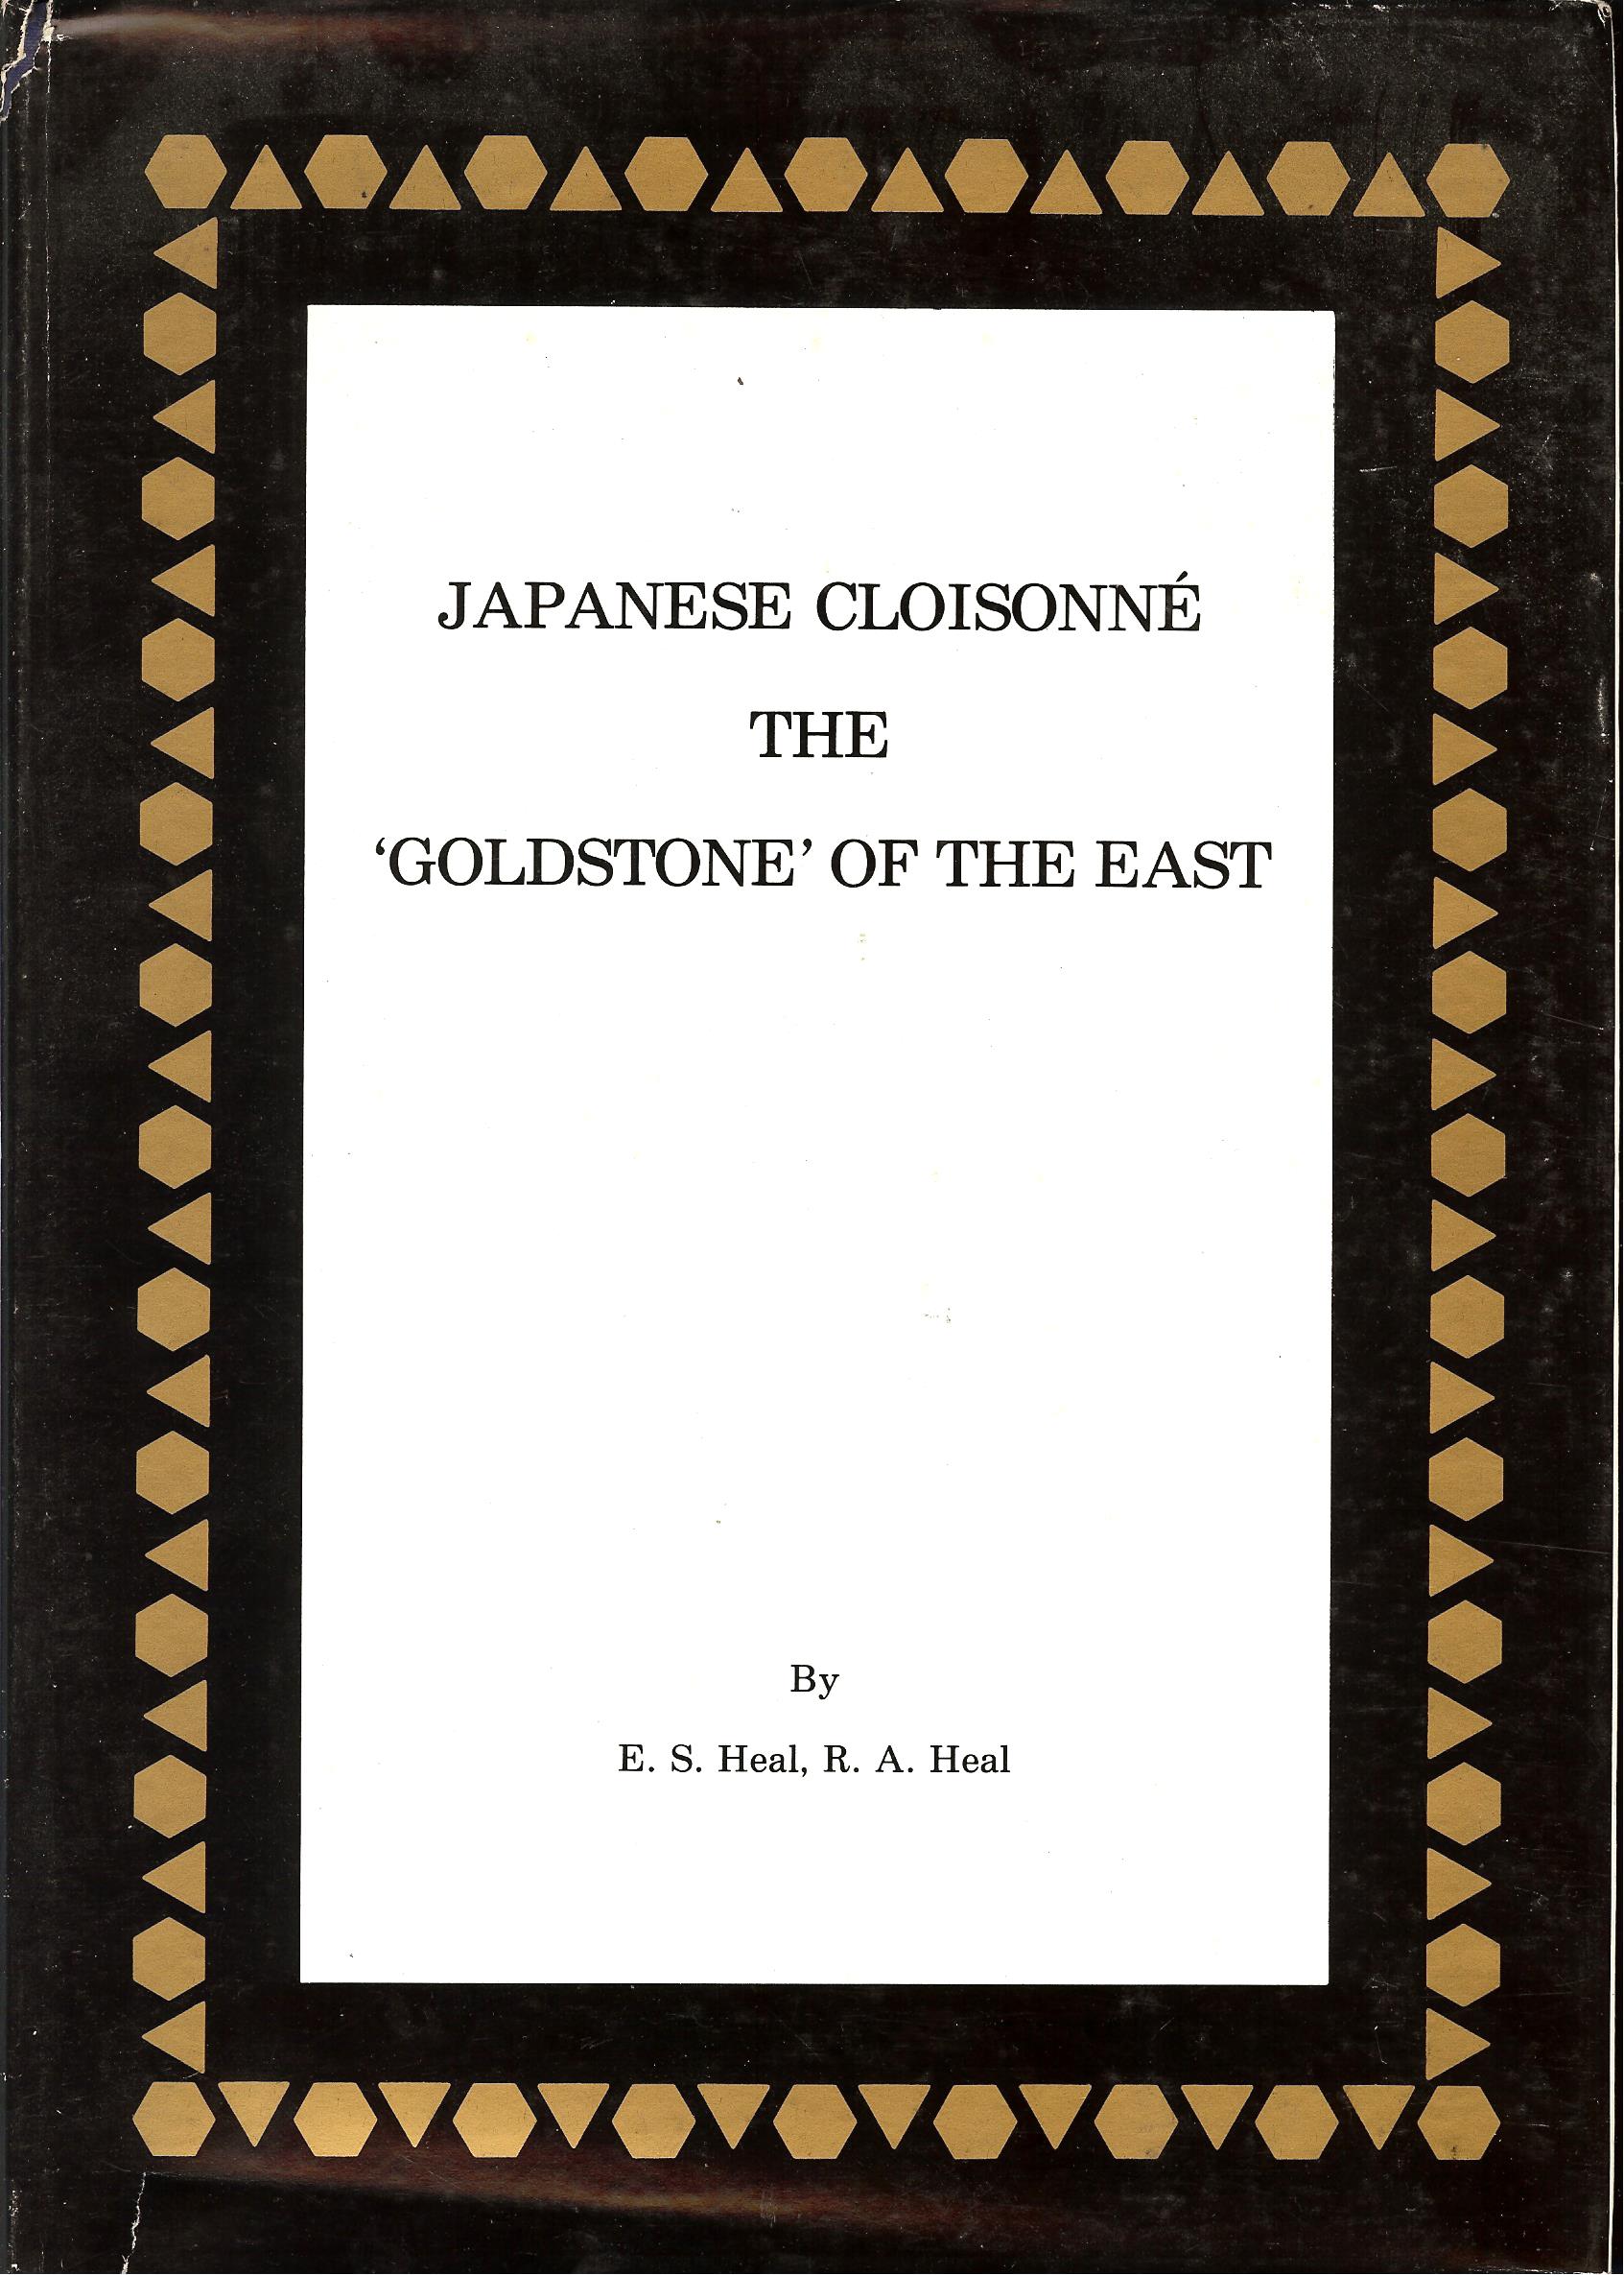 Heal, E.S. & Heal, R.A. - Japanese Cloisonne. The Goldstone of the East